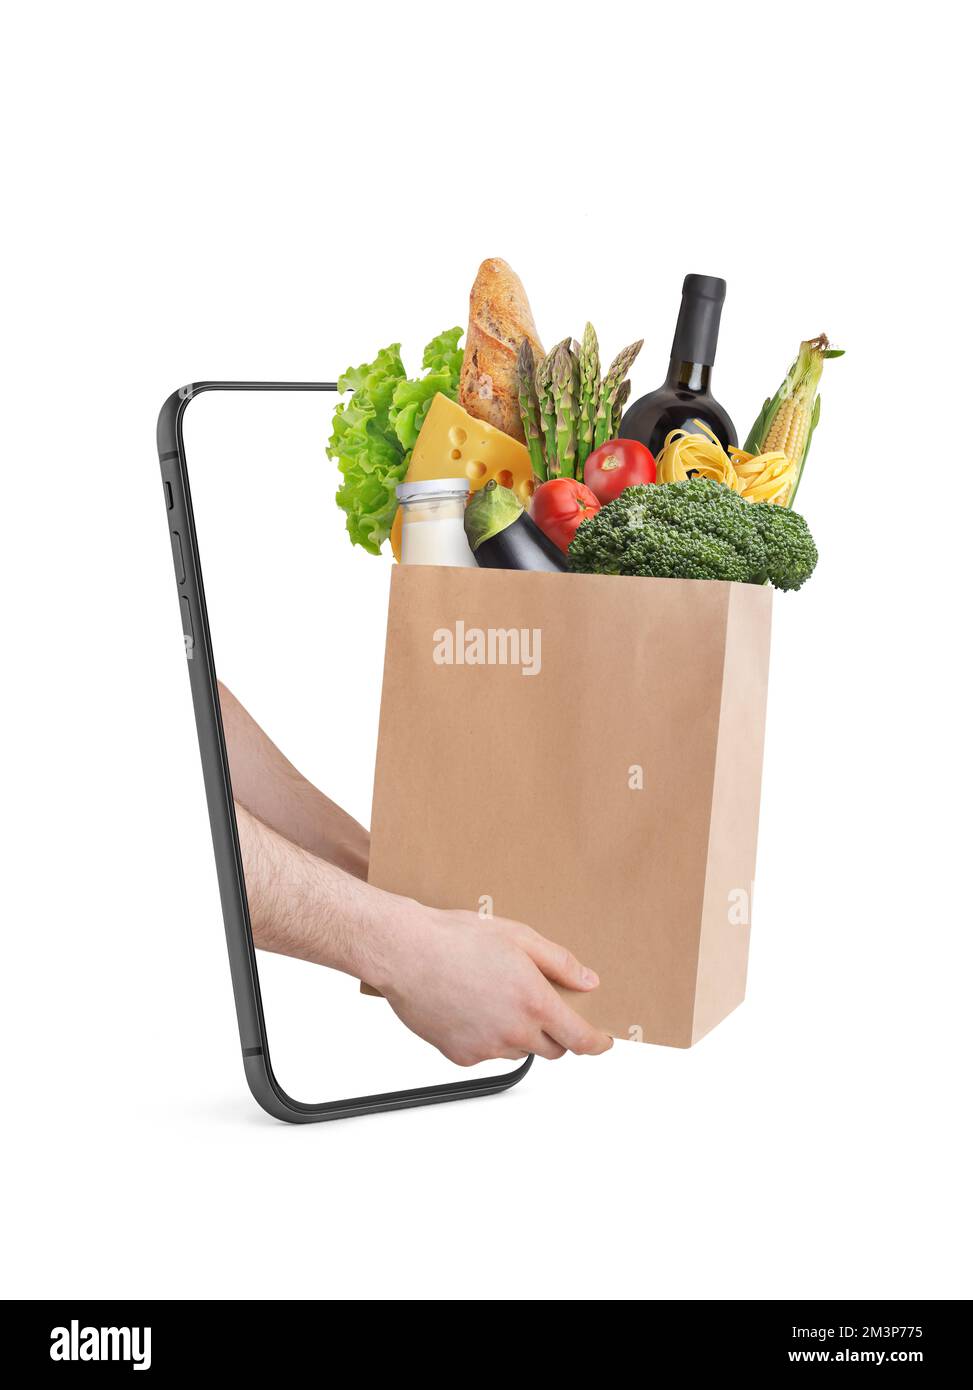 online food delivery concept. Hands with a package of groceries in the phone Stock Photo